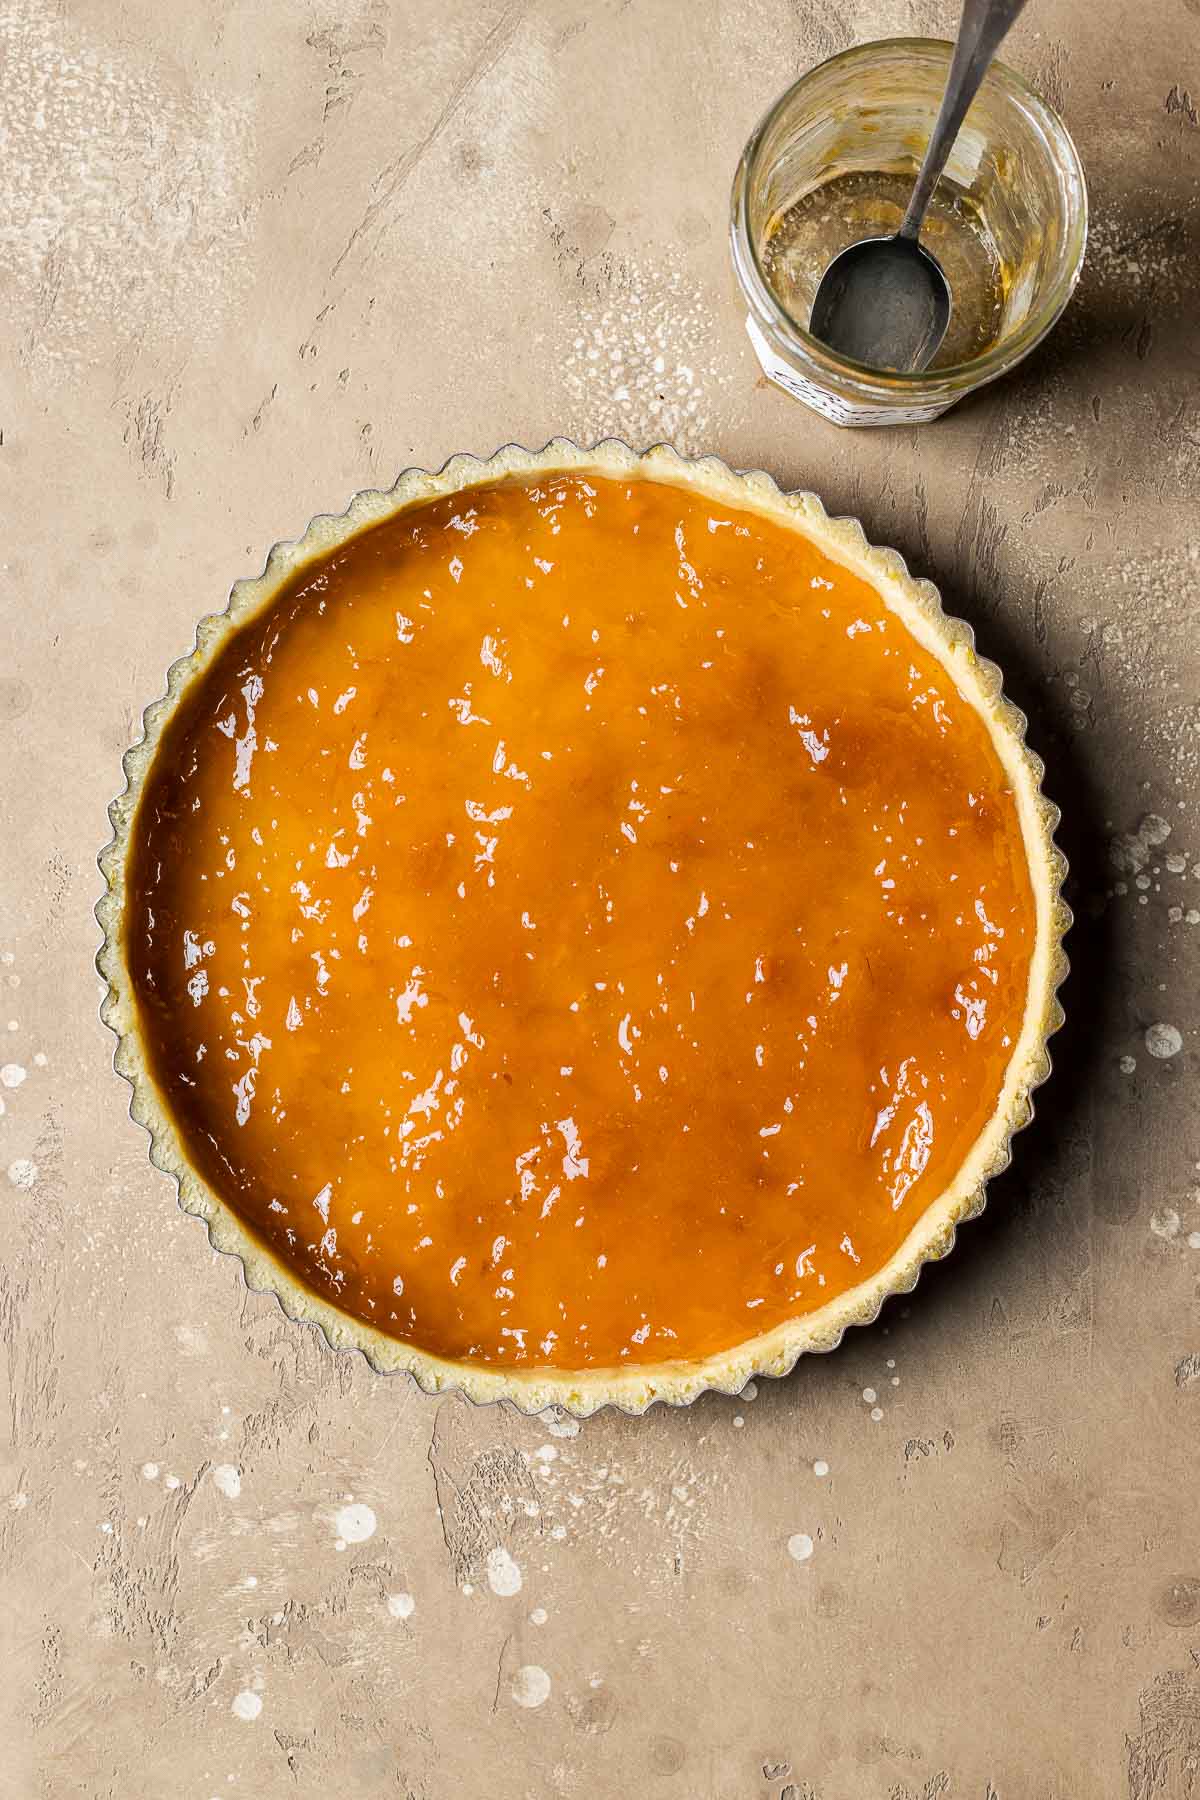 An unbaked tart shell filled with apricot jam.